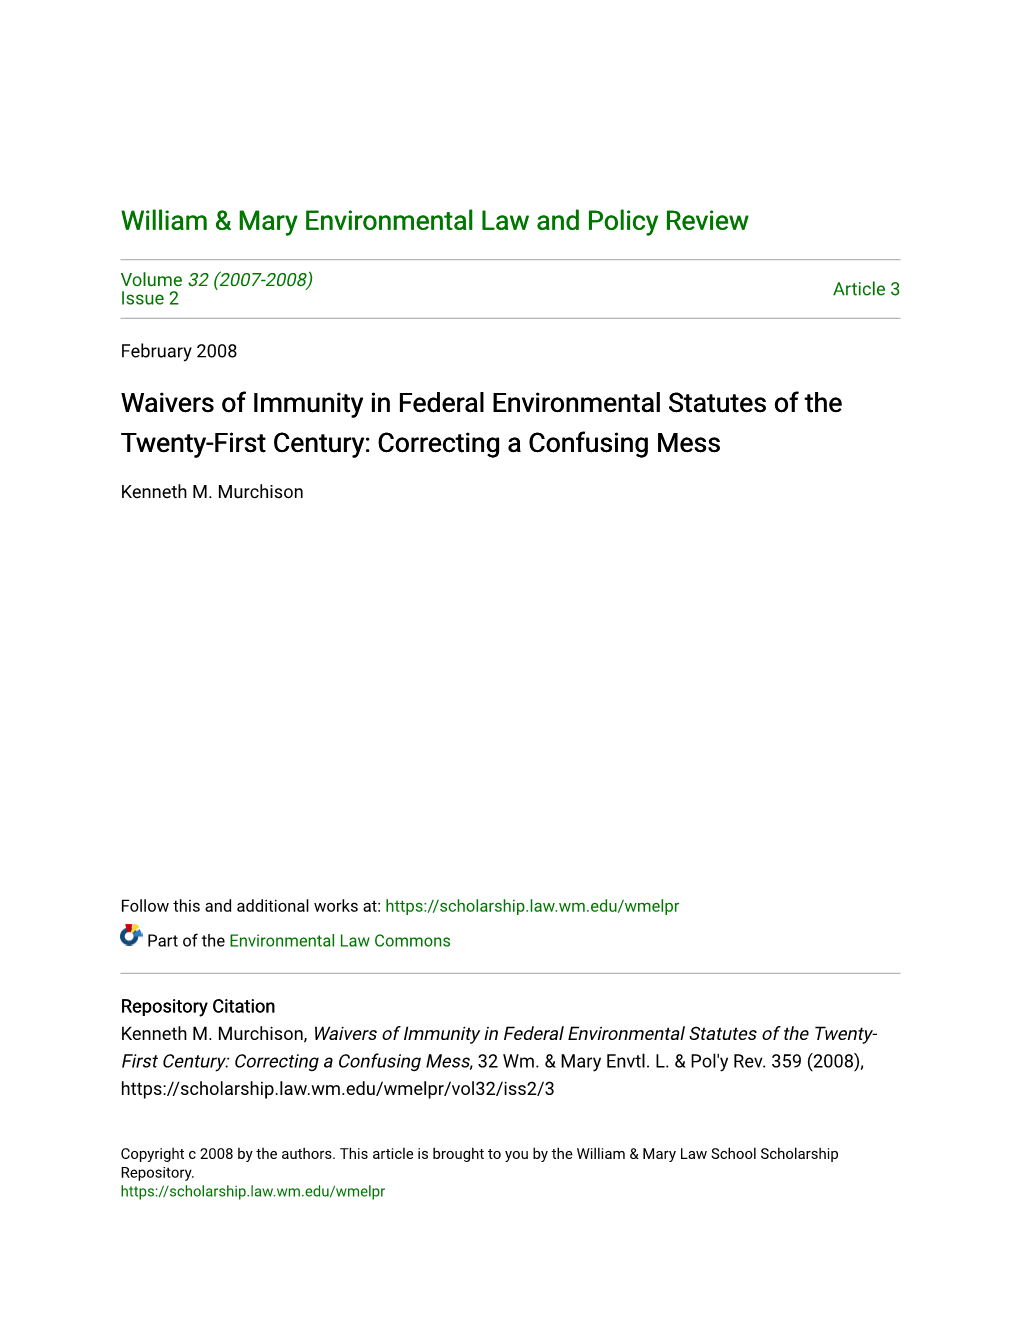 Waivers of Immunity in Federal Environmental Statutes of the Twenty-First Century: Correcting a Confusing Mess